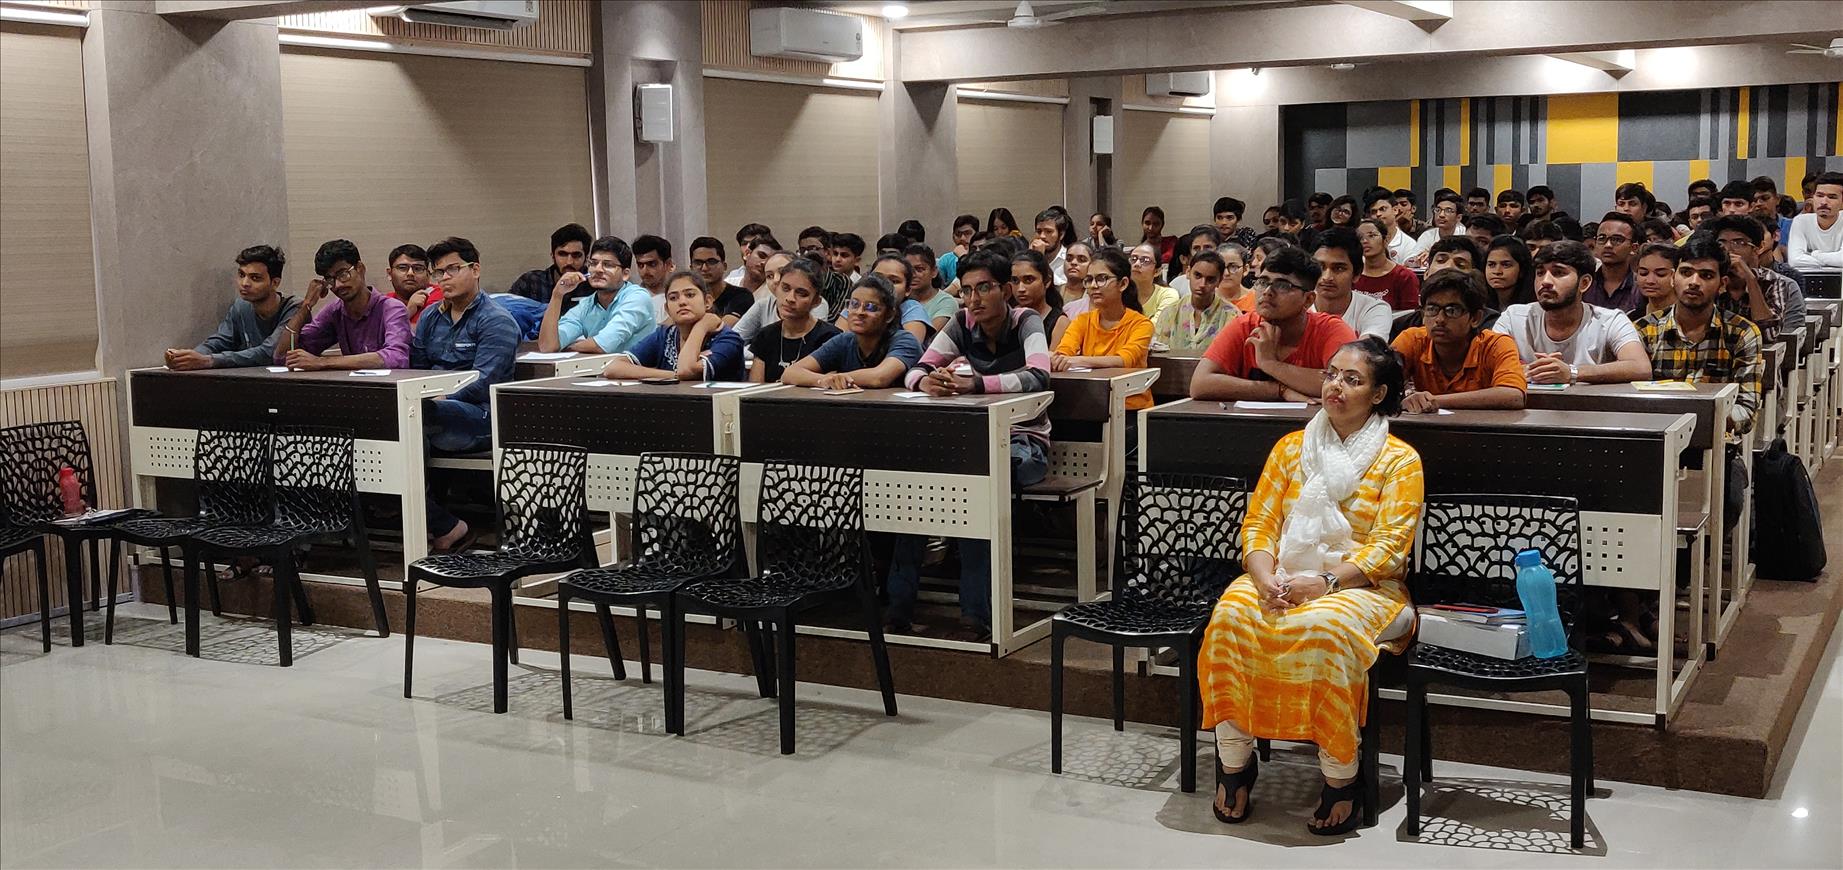 “Seminar on Personality Development” organized by C3 club for all the students of BBA / BCOM / BCA